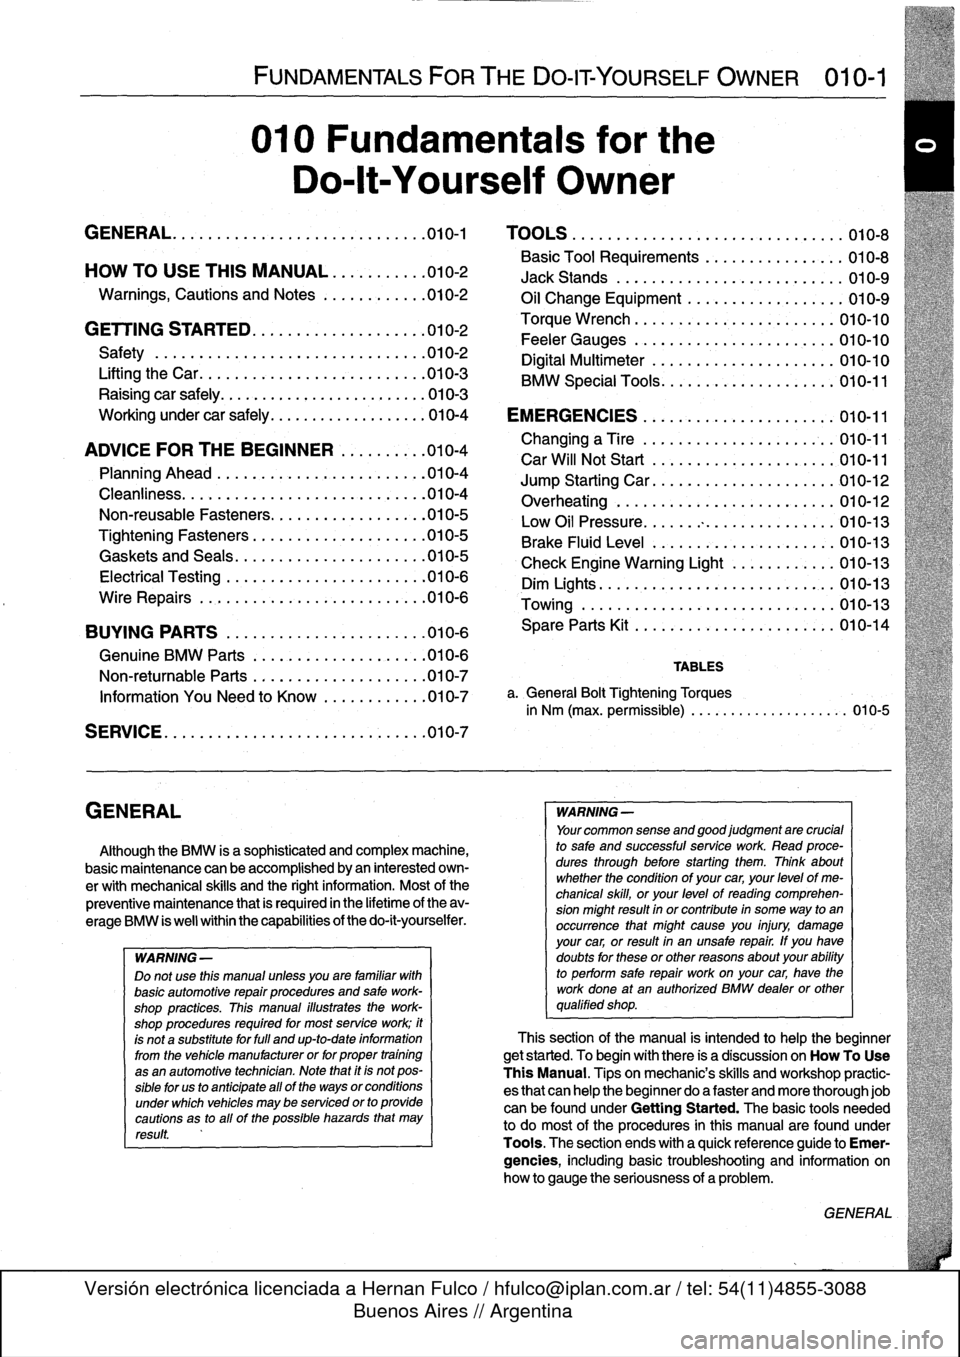 BMW 318i 1997 E36 Workshop Manual 
GENERAL

FUNDAMENTALS
FORTHE
DO-IT
YOURSELF
OWNER

	

010-1

010
Fundamentals
for
the

Do-lt-Yourself
Owner

GENERAL
.......
.
.
.
......
.
.........
.
.
.010-1

	

TOOLS
.
.
...
.
............
.
...